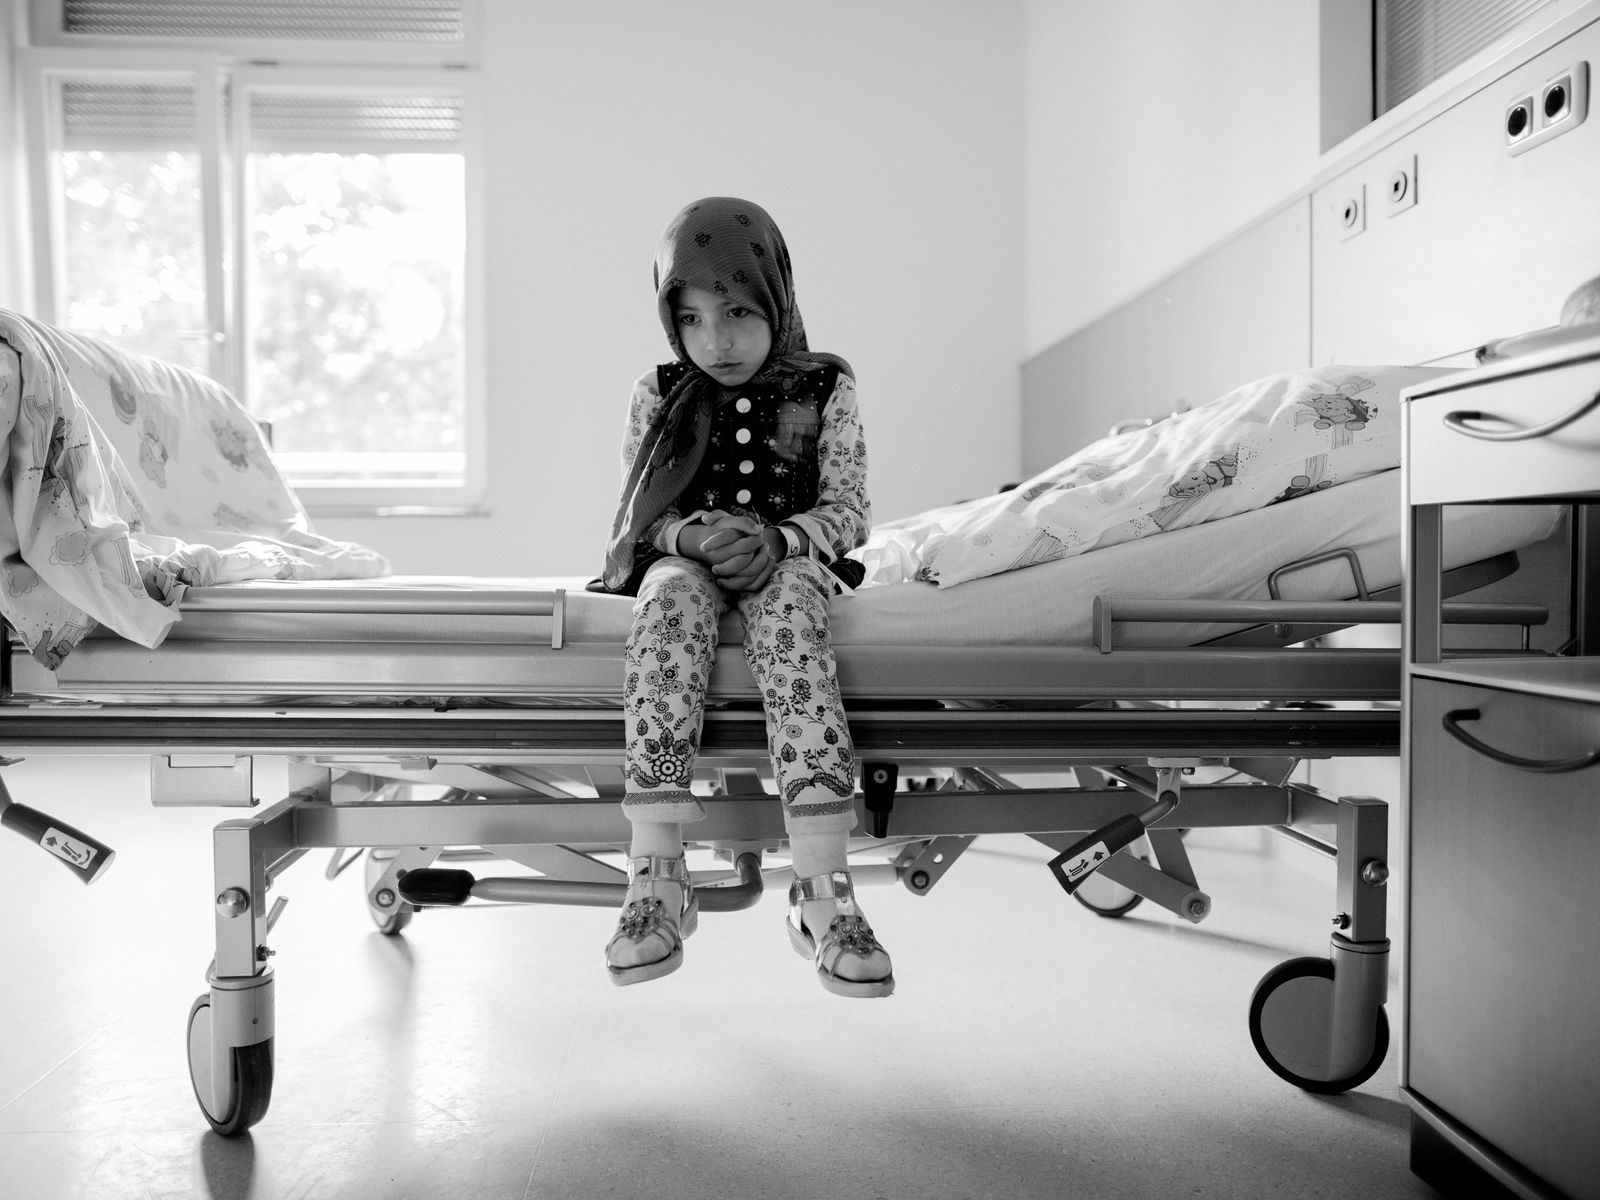 © Toby Binder - Muzghan arrived in a hospital in Germany around 60 hours after she left her home in Afghanistan.